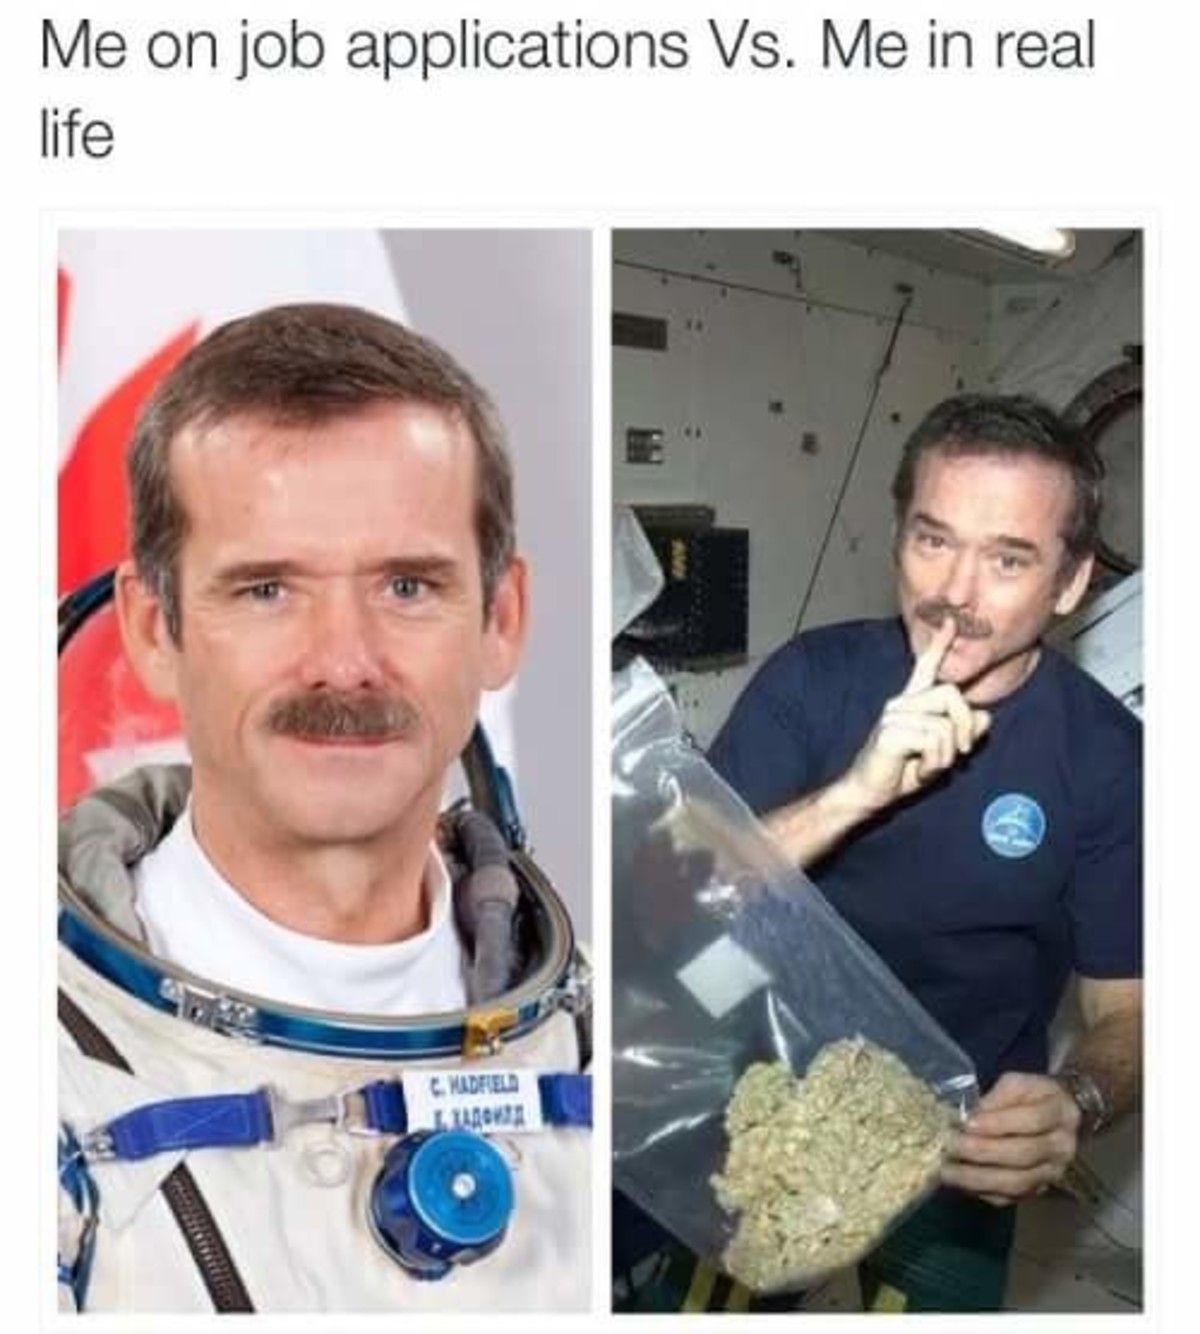 https://funnyjunk.com/Faspivnysp+akab+nyiflyops/funny-pictures/60. .. I really want to believe they smuggled weed onto the space station. I can't even imagine getting baked and looking at Earth, the moon, the stars and the vastnes